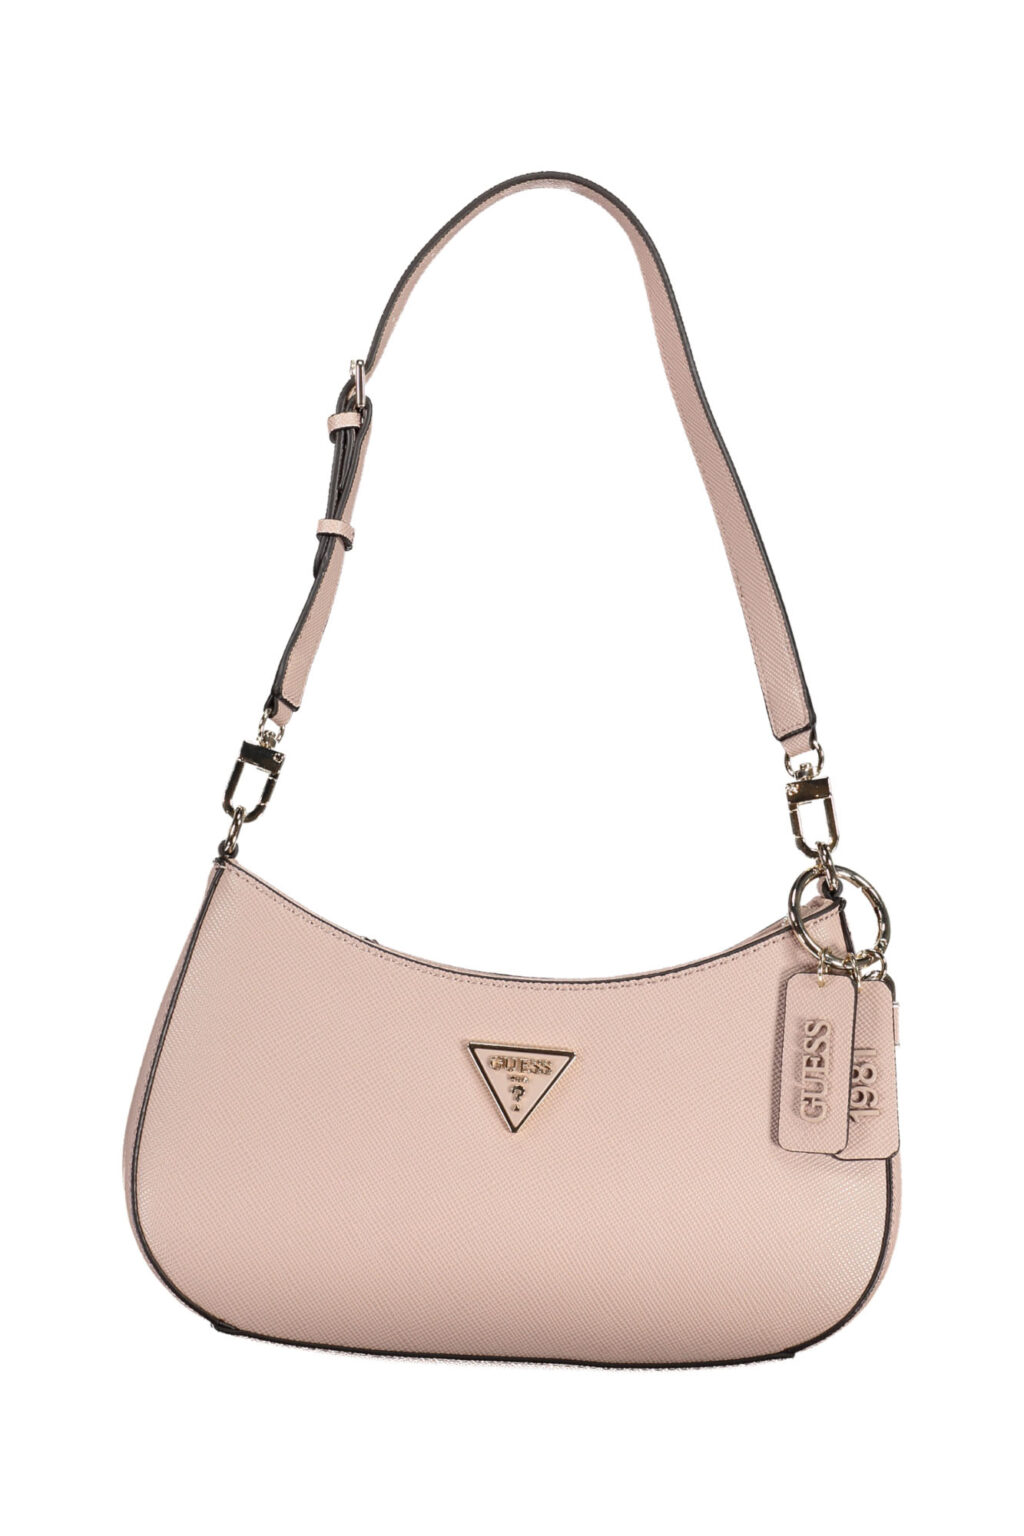 GUESS JEANS PINK WOMEN'S BAG ZG787918_RSROSEWOOD